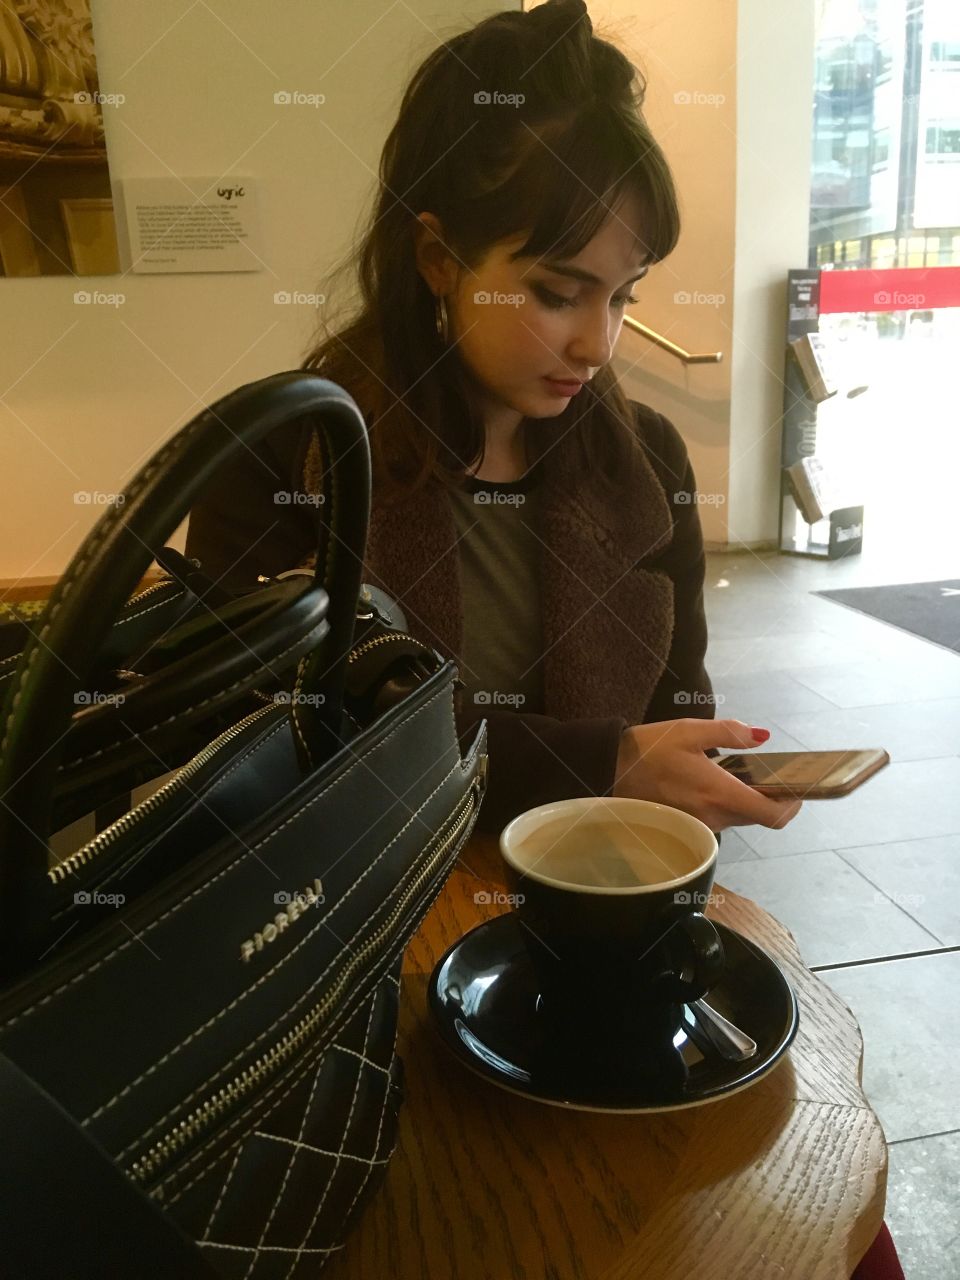 Pretty young woman, coat and bag. Sitting at table using her phone